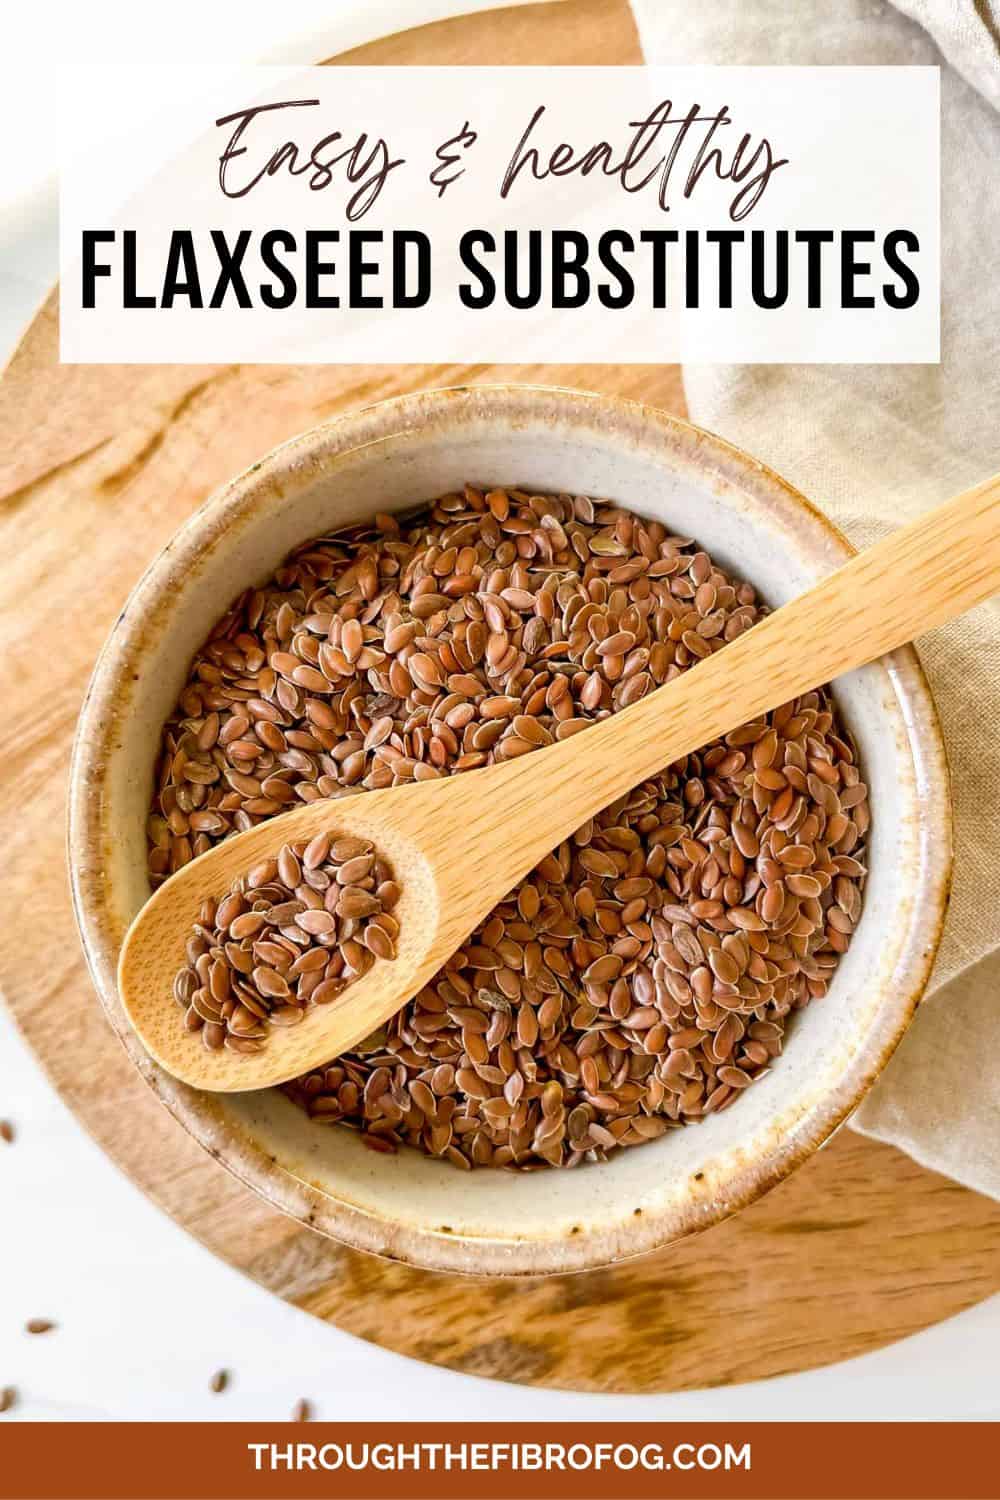 labelled easy and healthy flaxseed substitutes with a small bowl of flaxseeds with a spoonful of seeds on top of it on a wooden board.